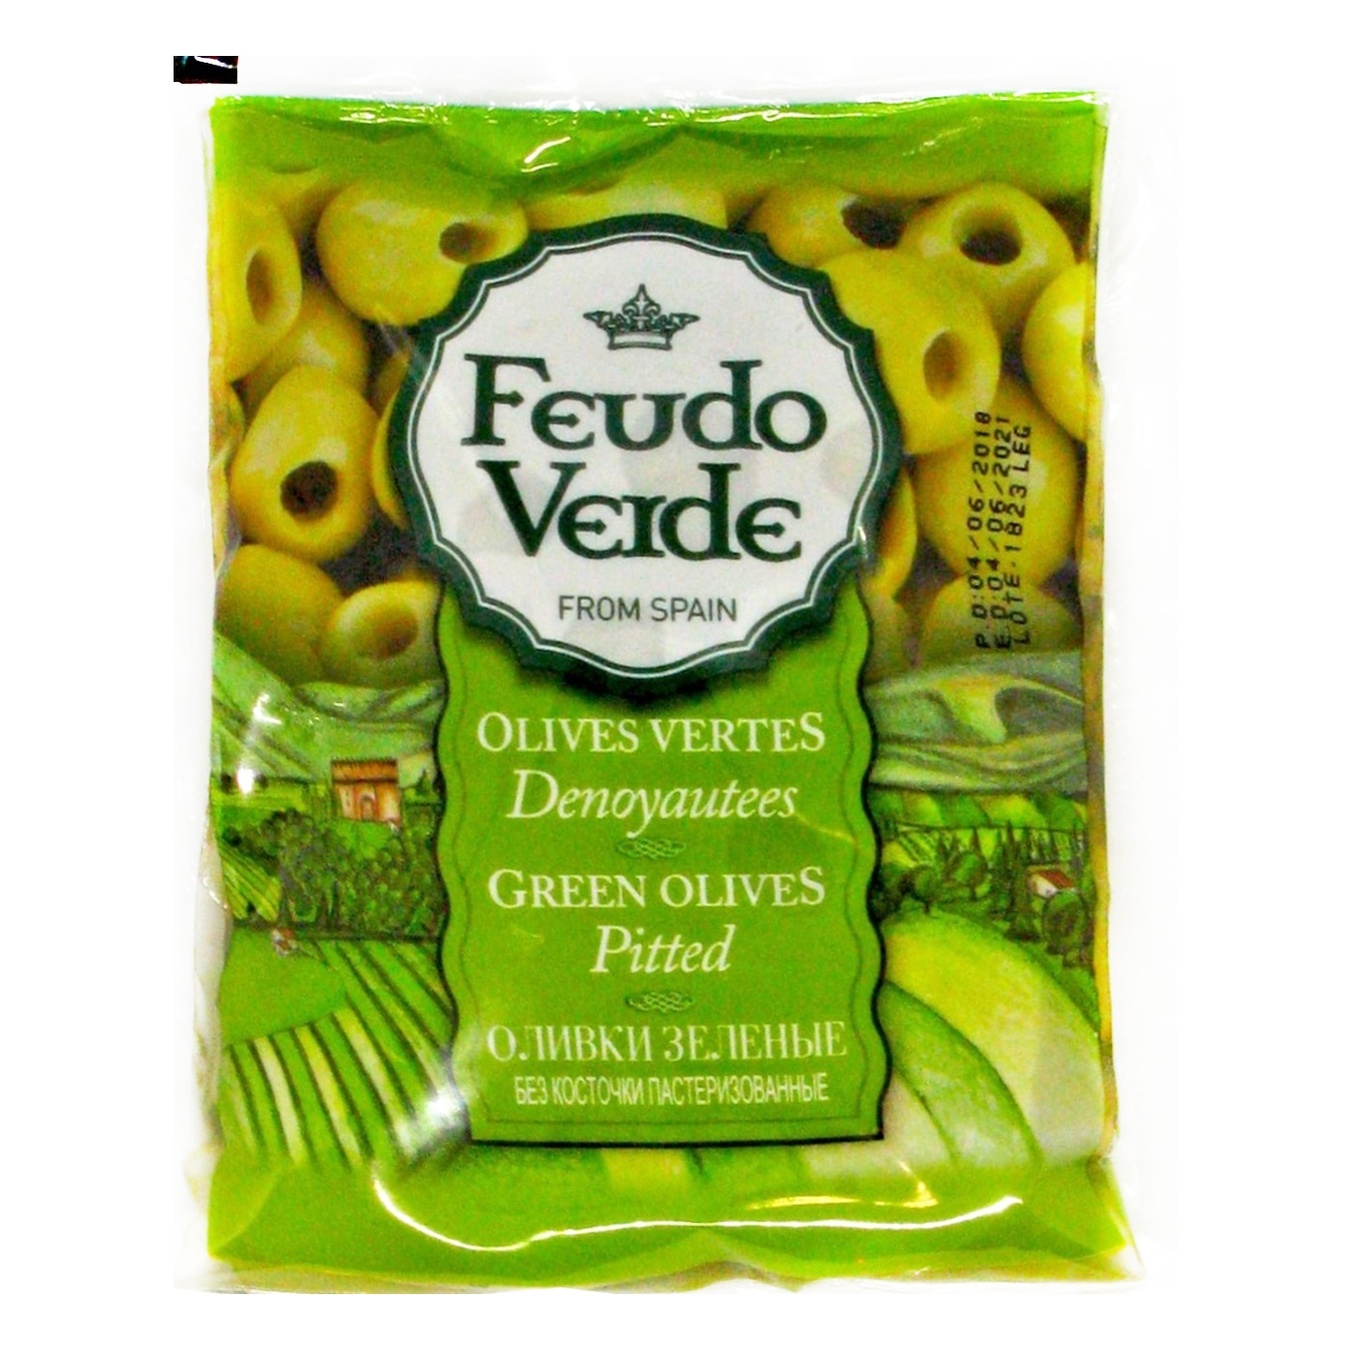 Feudo Verde Pitted Green Olives 170g